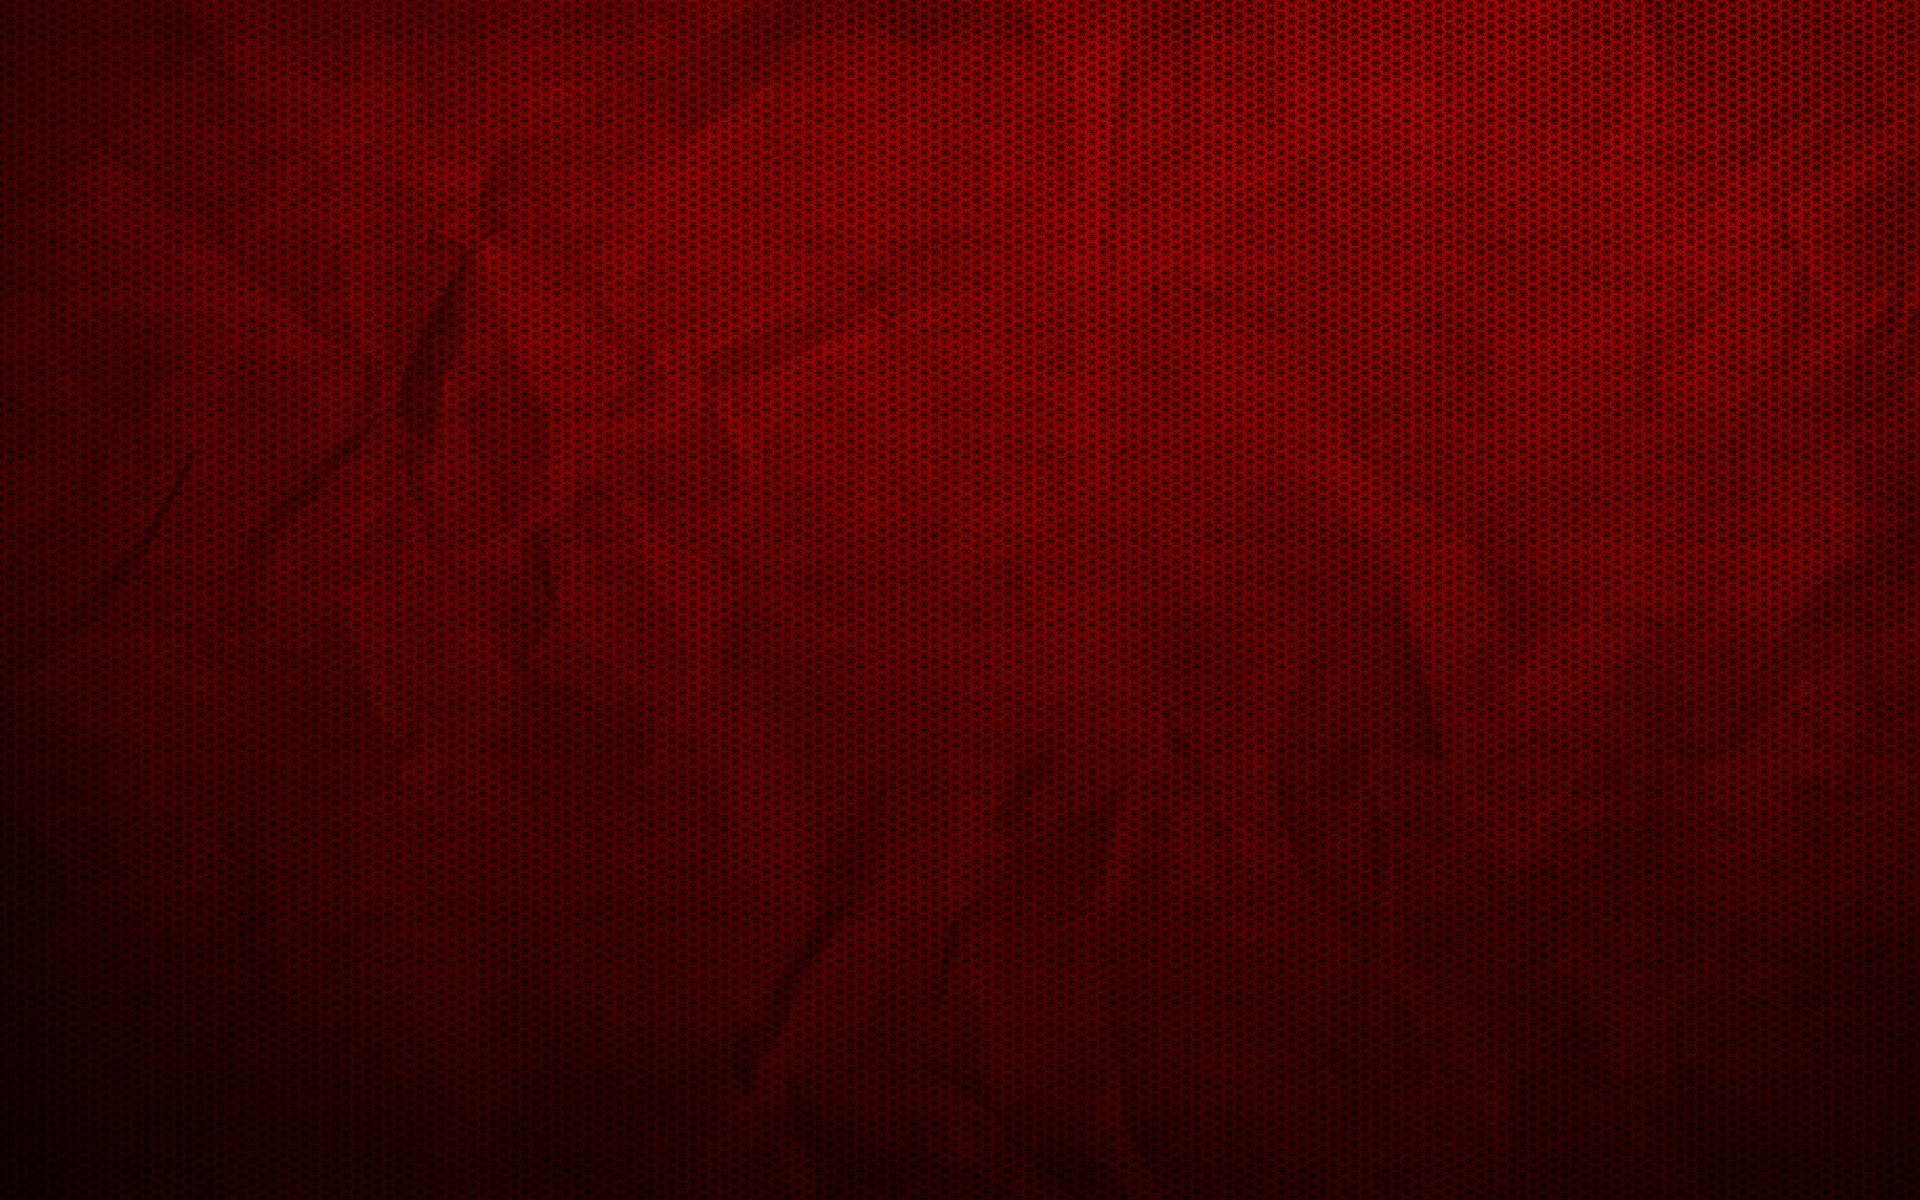 Free Red Color Wallpaper Downloads, [200+] Red Color Wallpapers for FREE |  